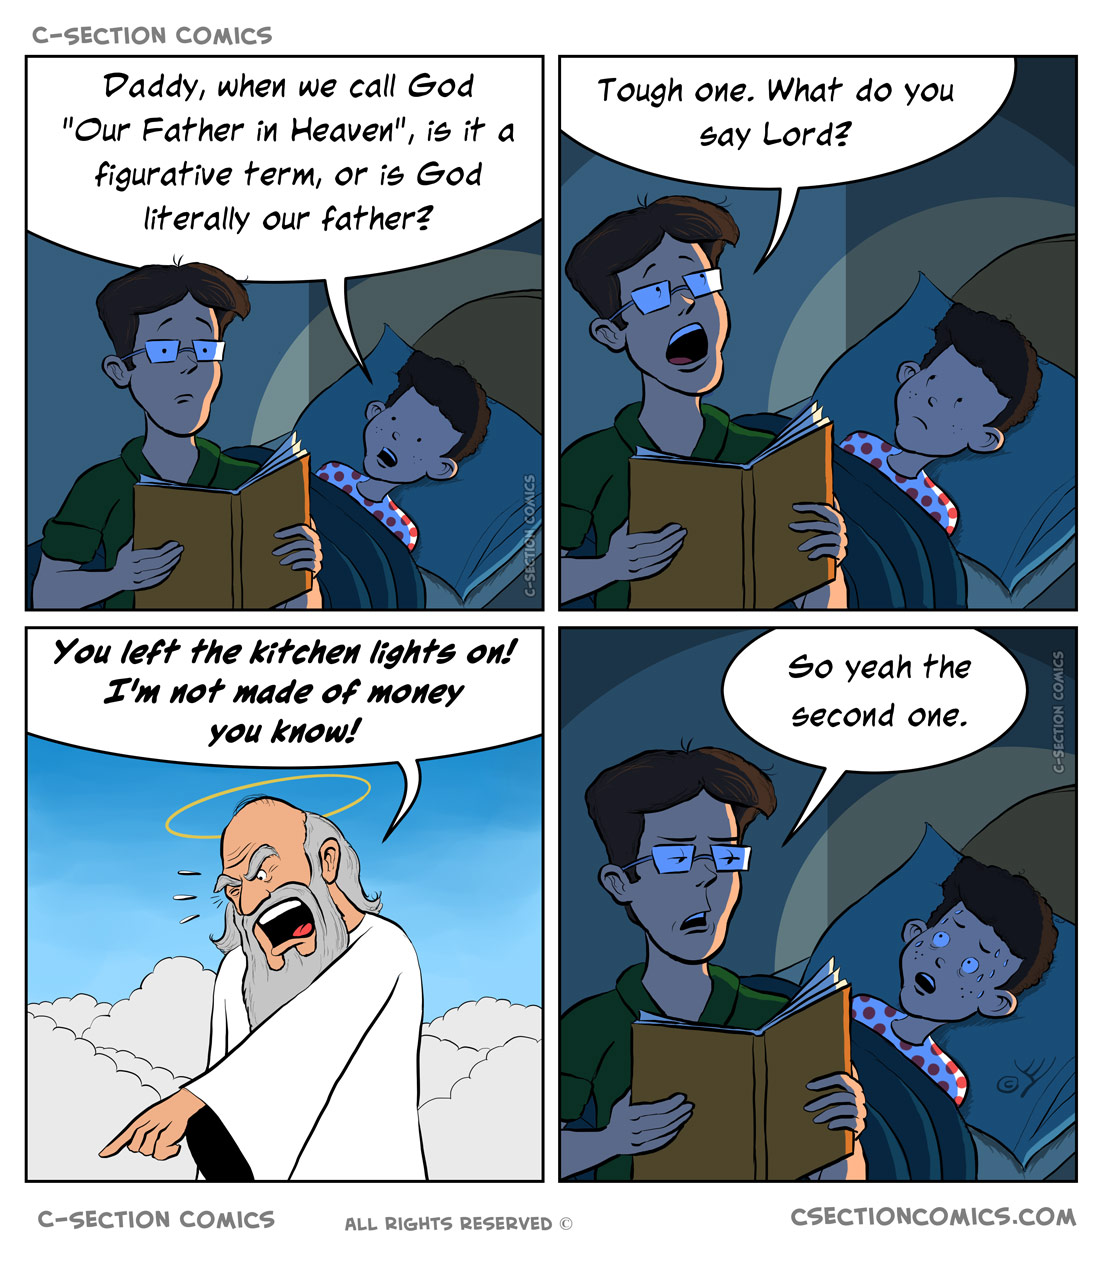 Our Father in Heaven - by C-Section Comics